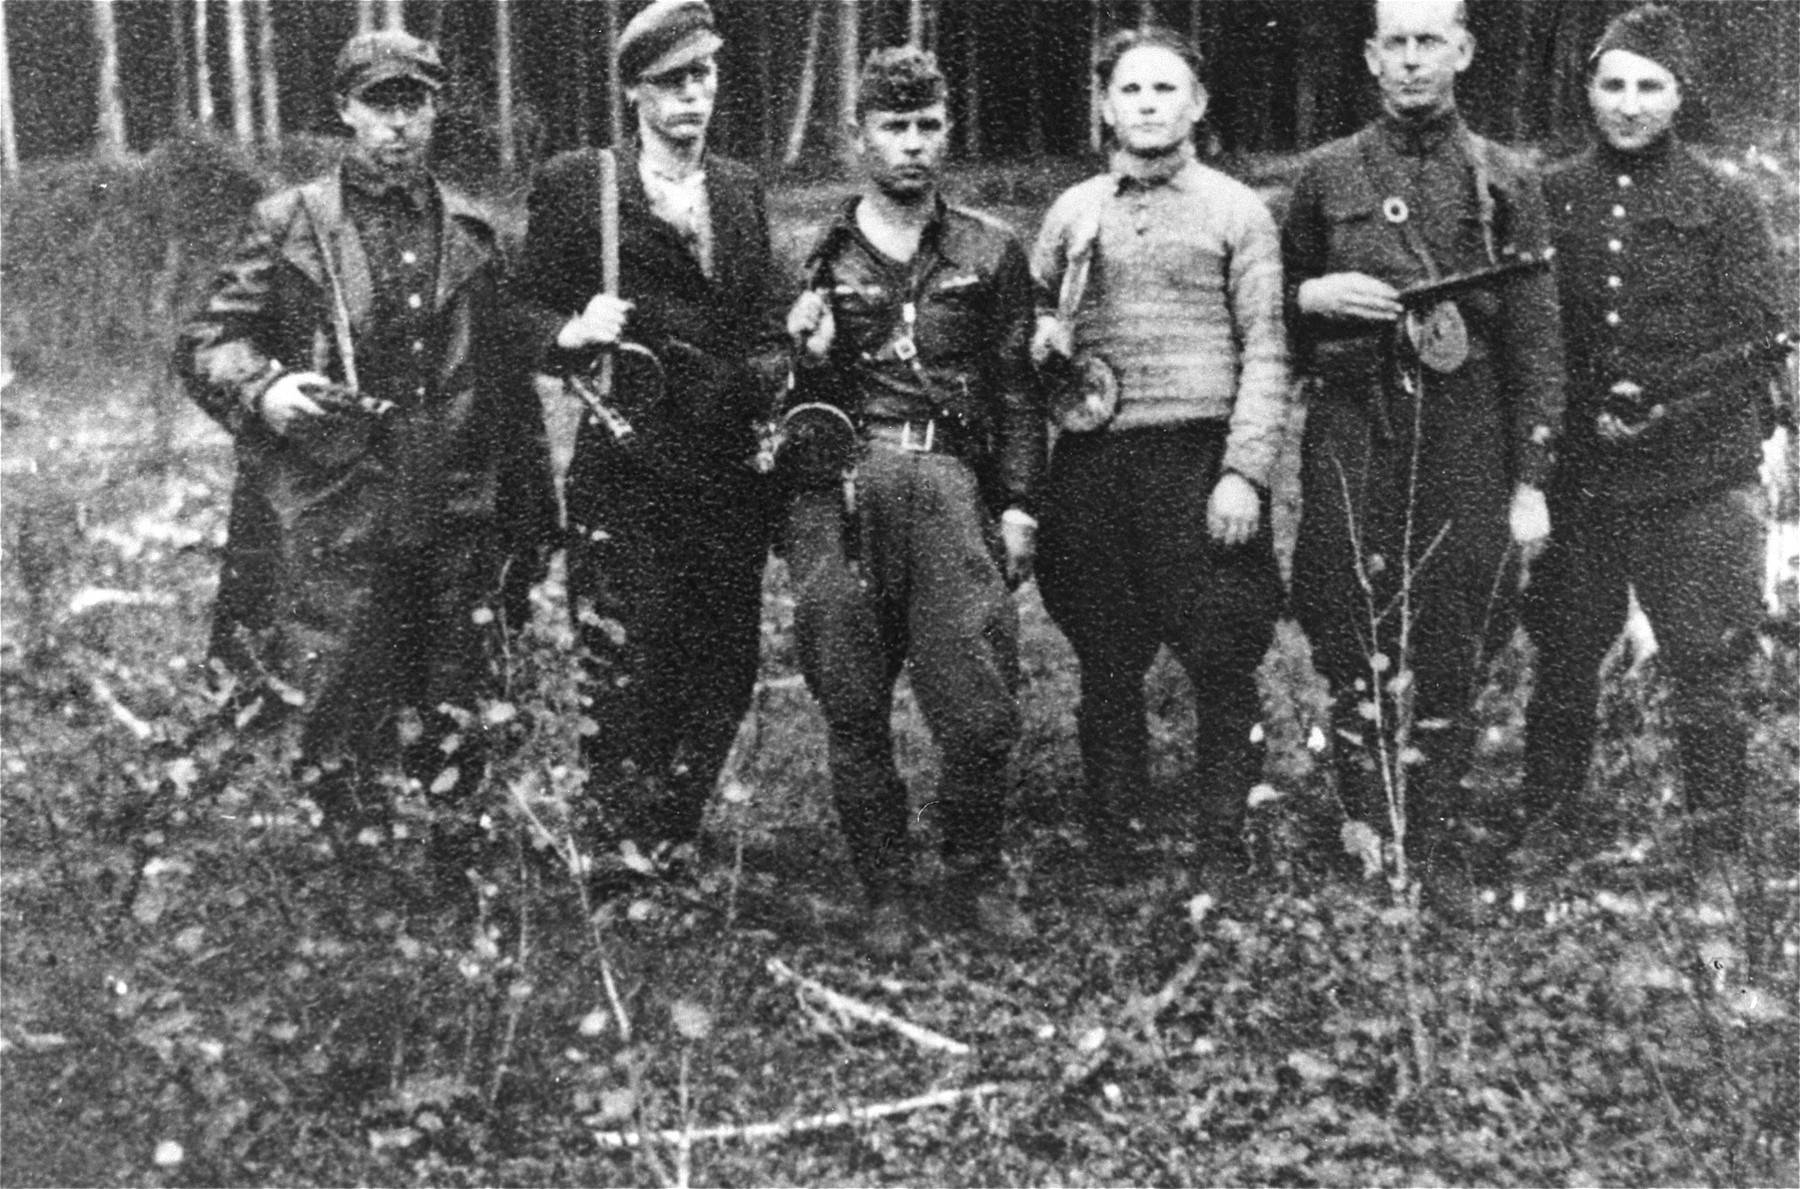 A Jewish partisan group in the Rudninkai forest.  

On the far right is Max (Motl) Wischkin.  Moshe Abramovytz (b. 1917 in Kosvo Polska) is fourth from the right.